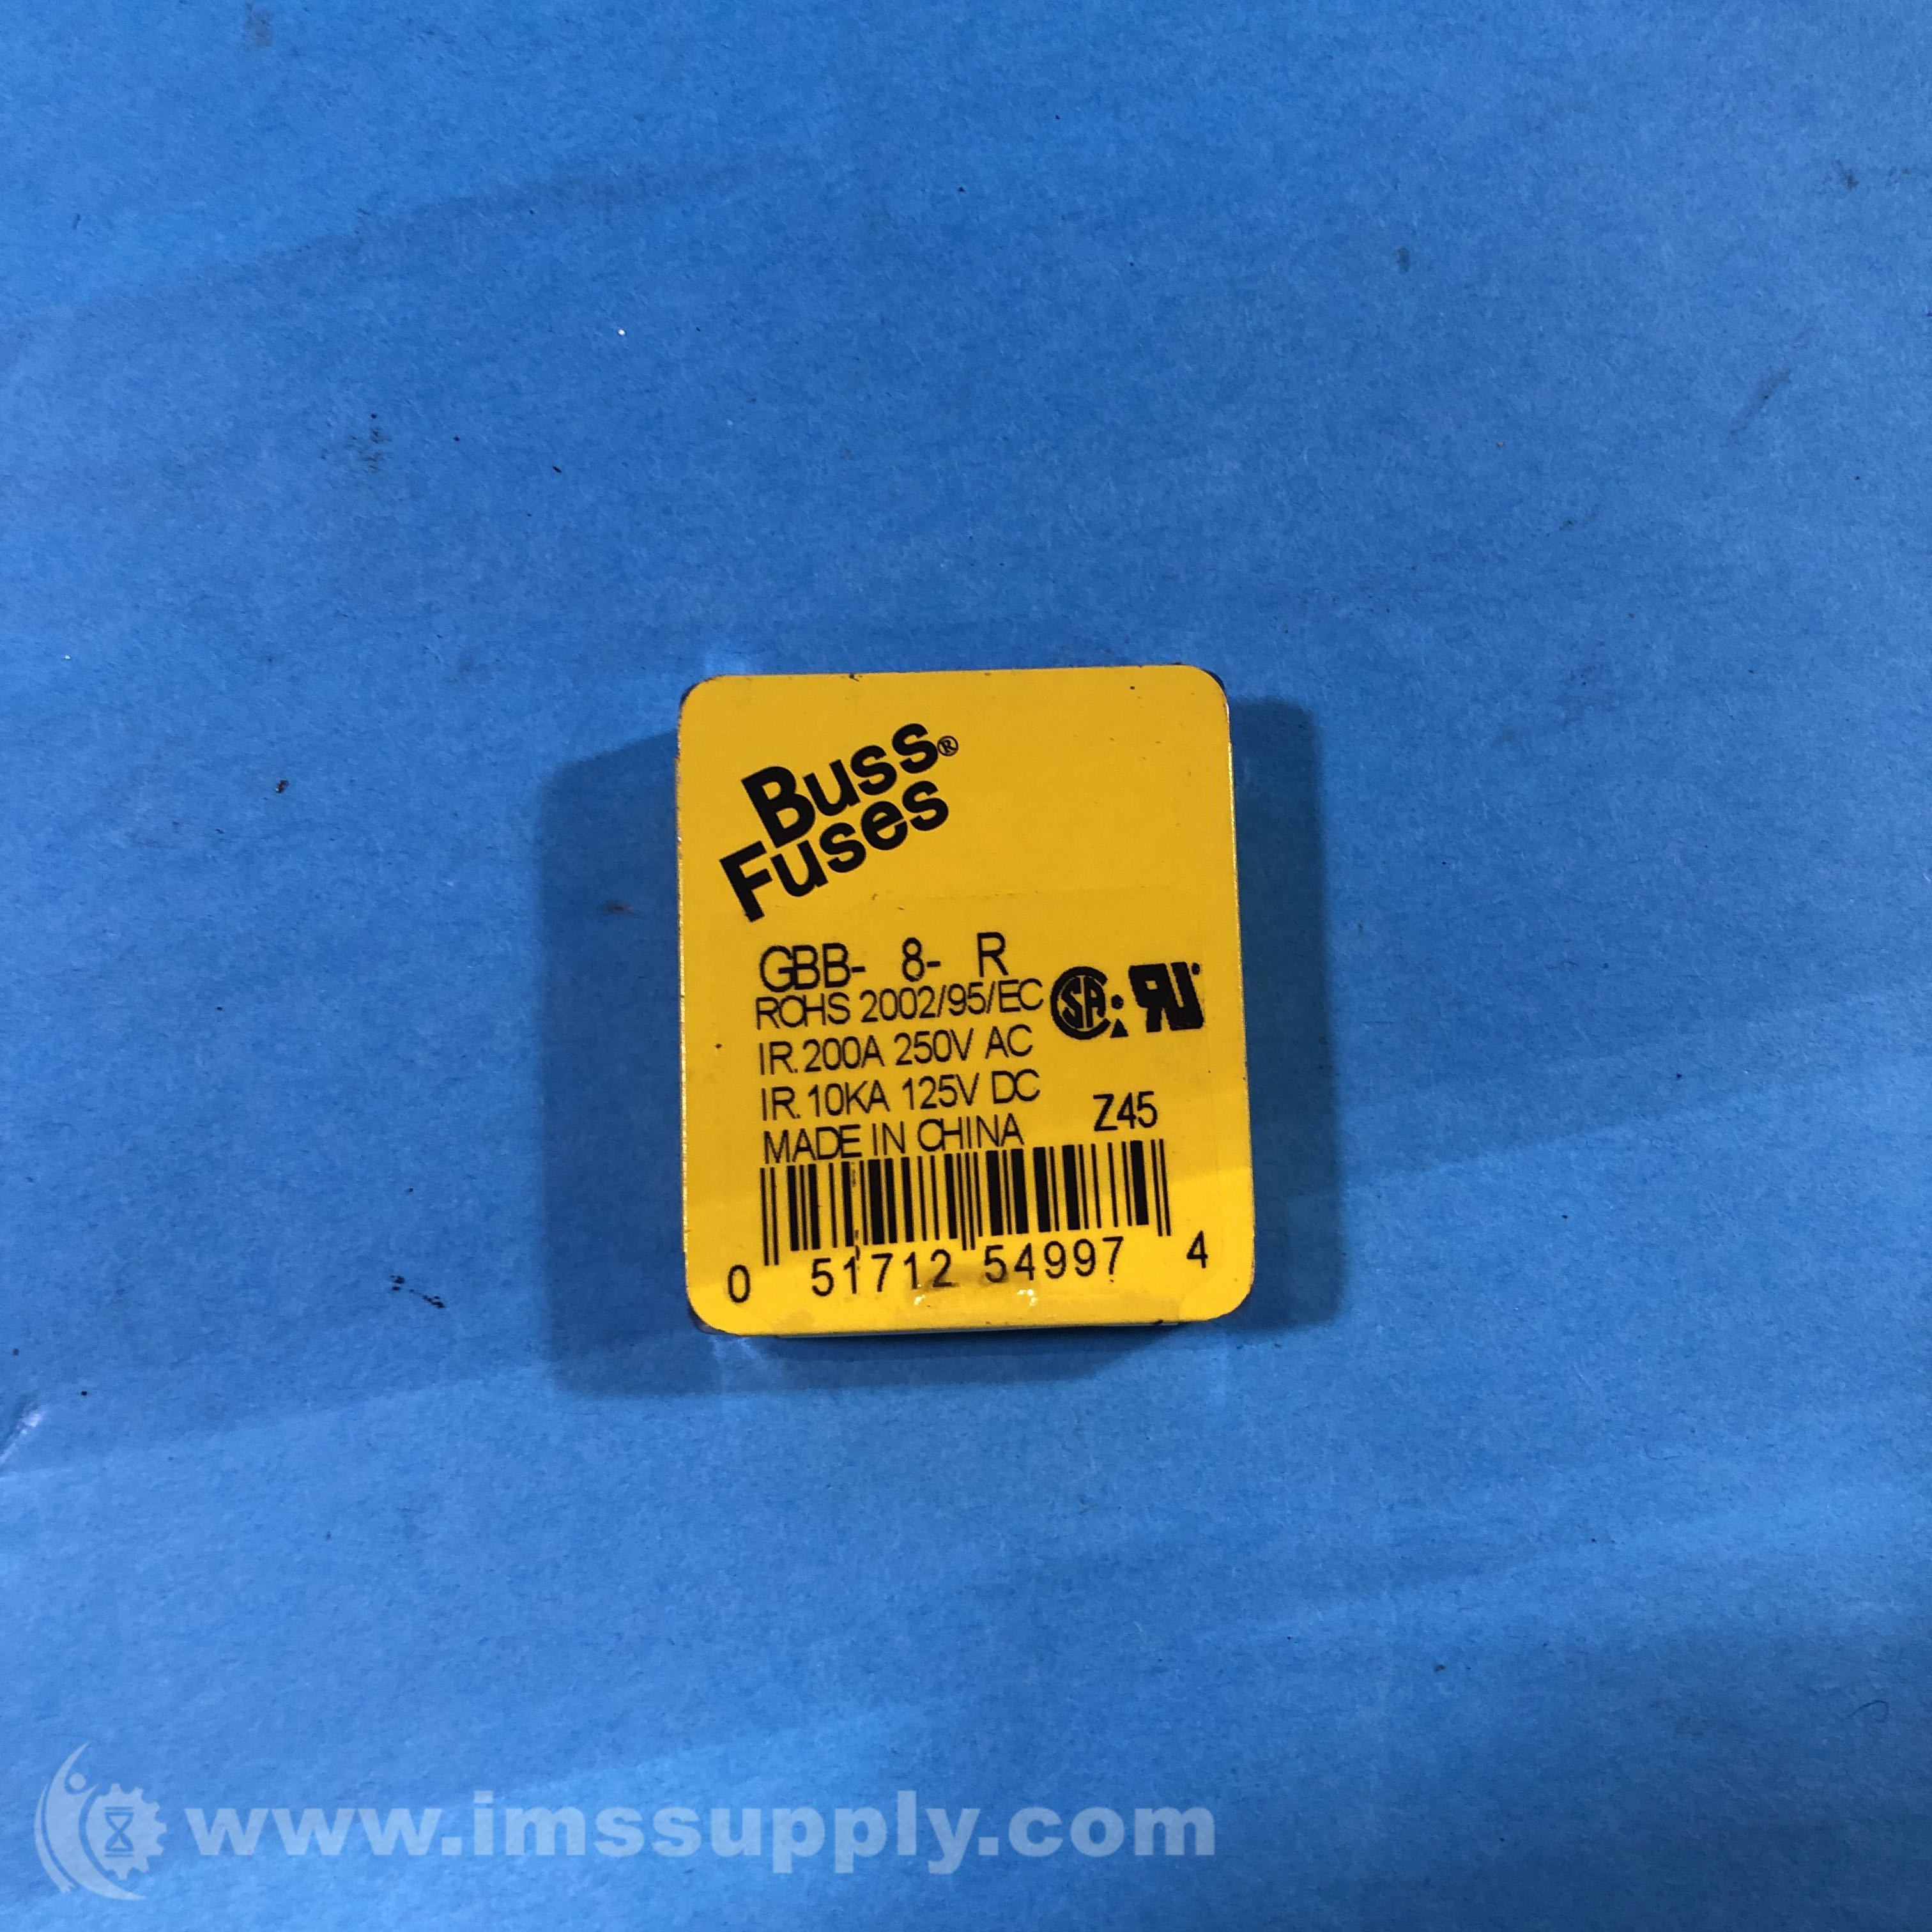 Buss GBB-8-R Pack of Cartridge Fuses Ceramic Very Fast Acting IMS Supply